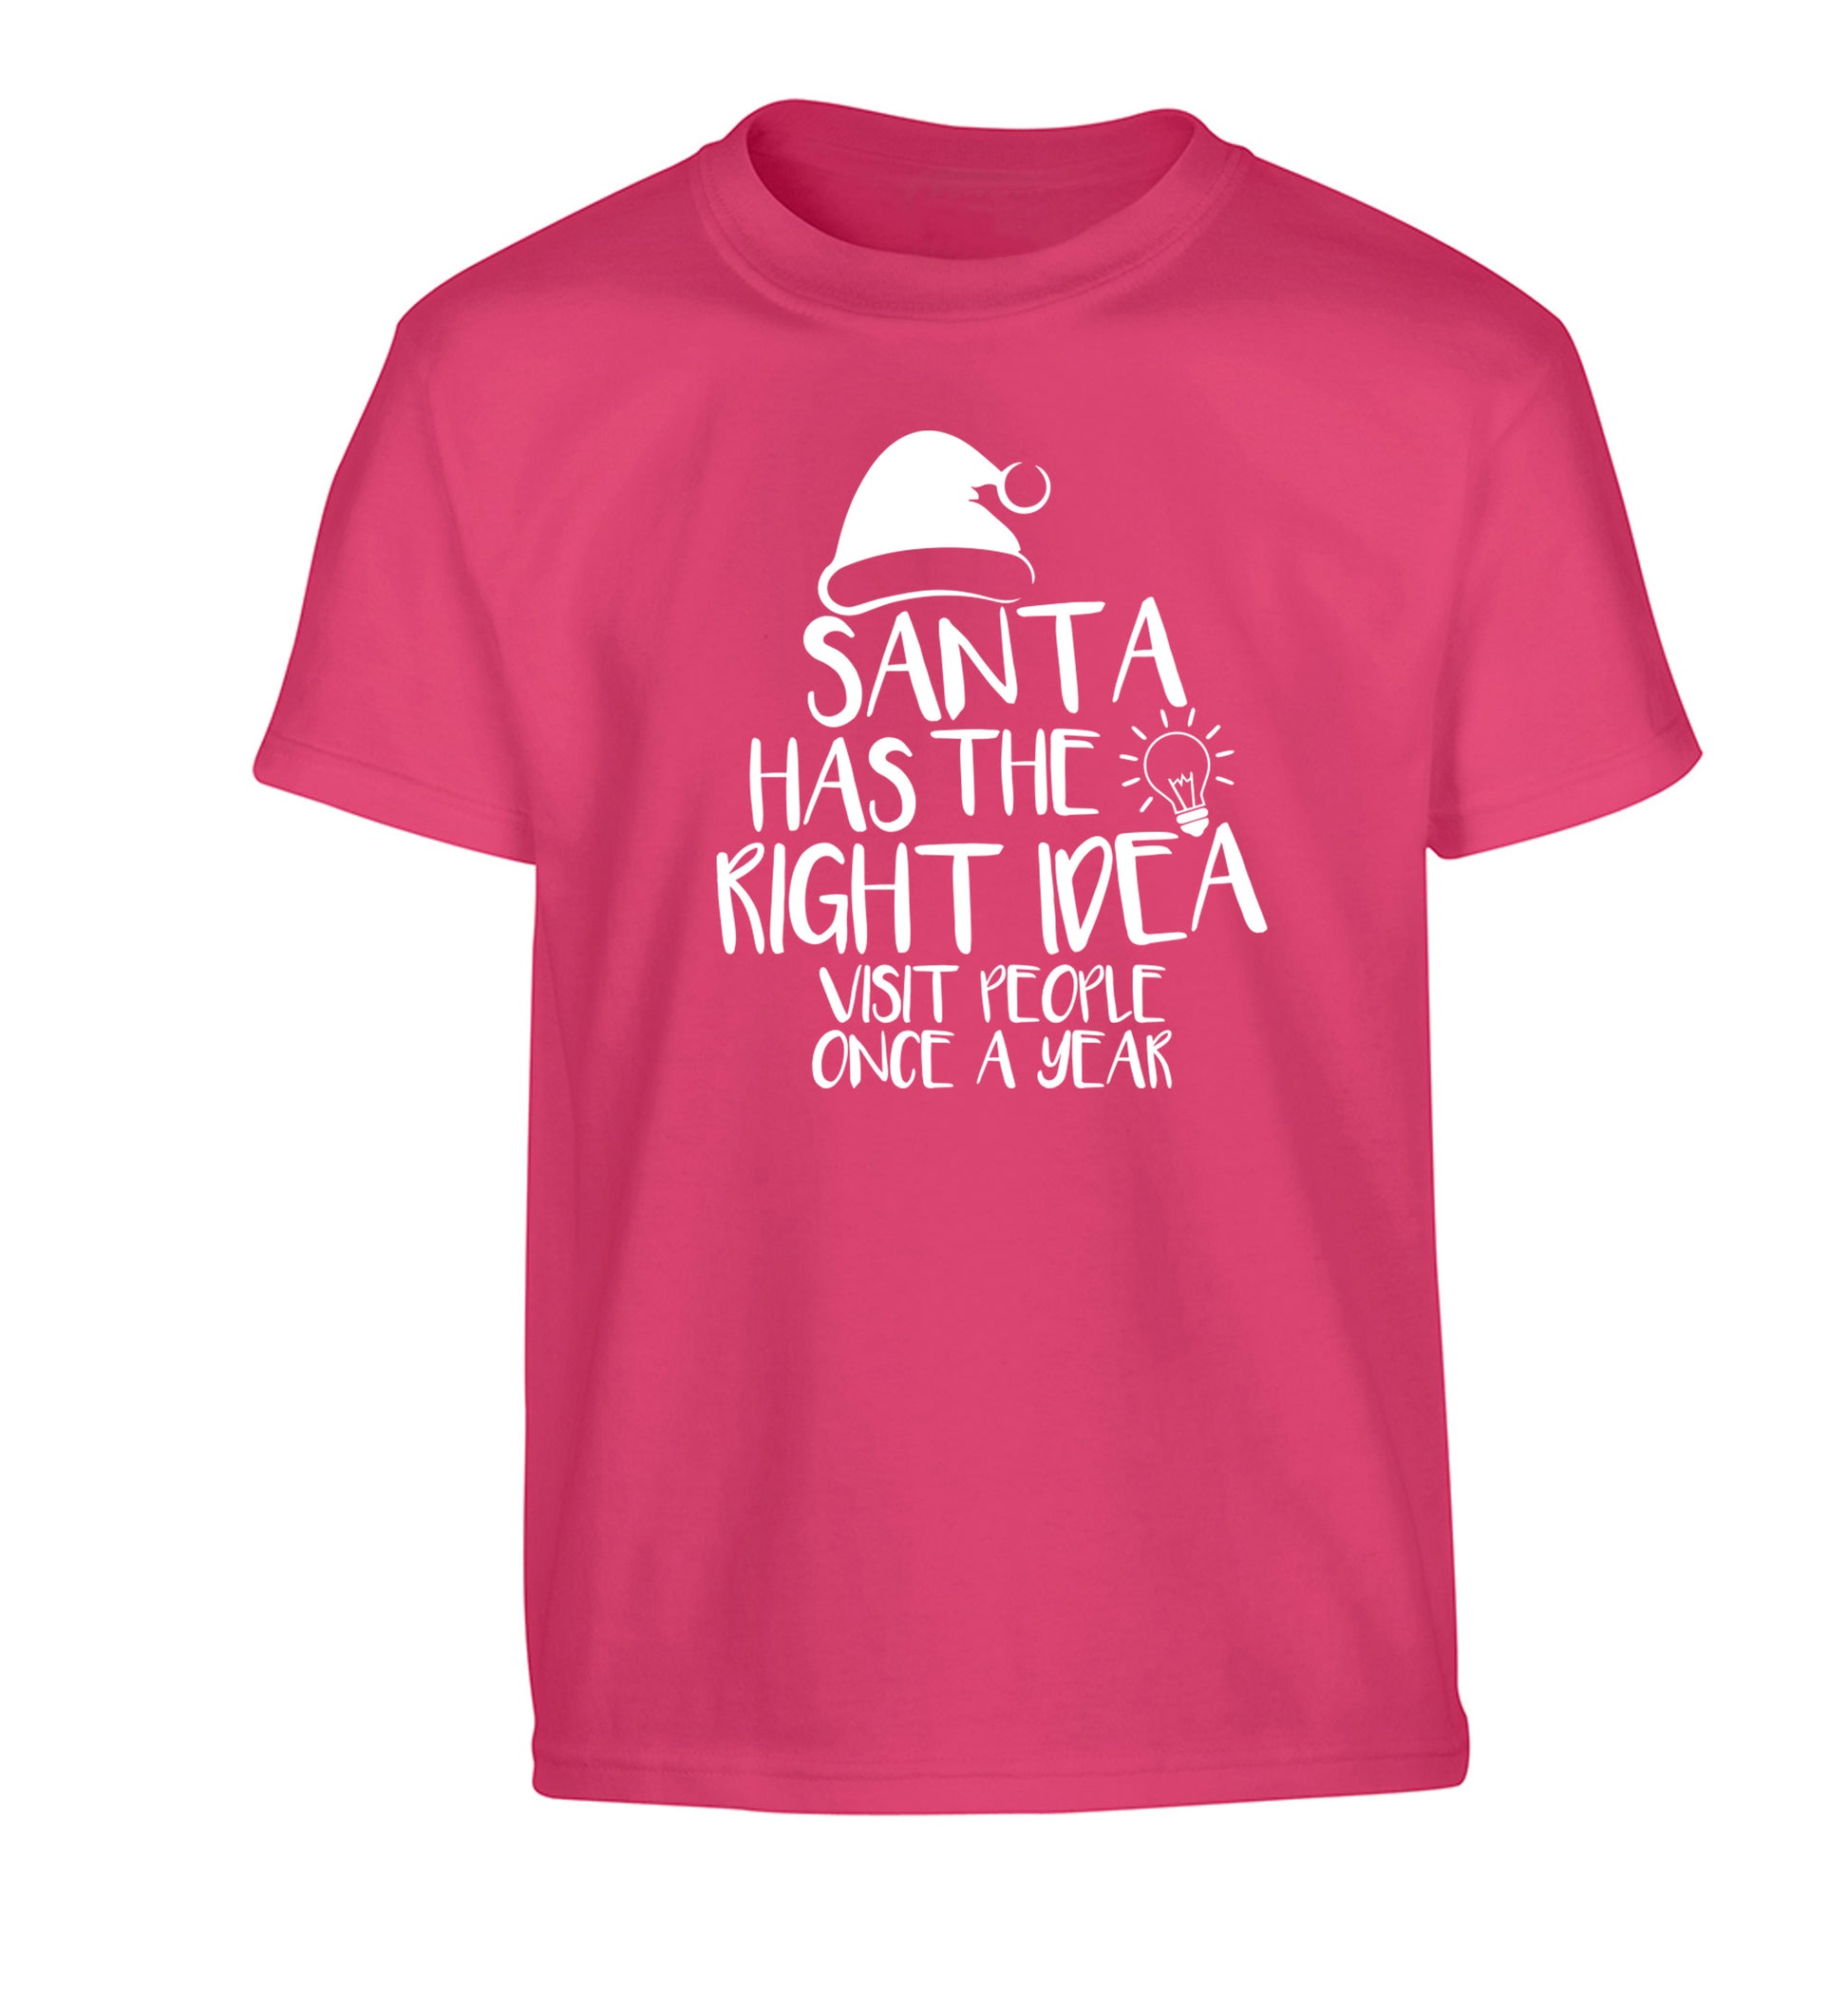 Santa has the right idea visit people once a year Children's pink Tshirt 12-14 Years